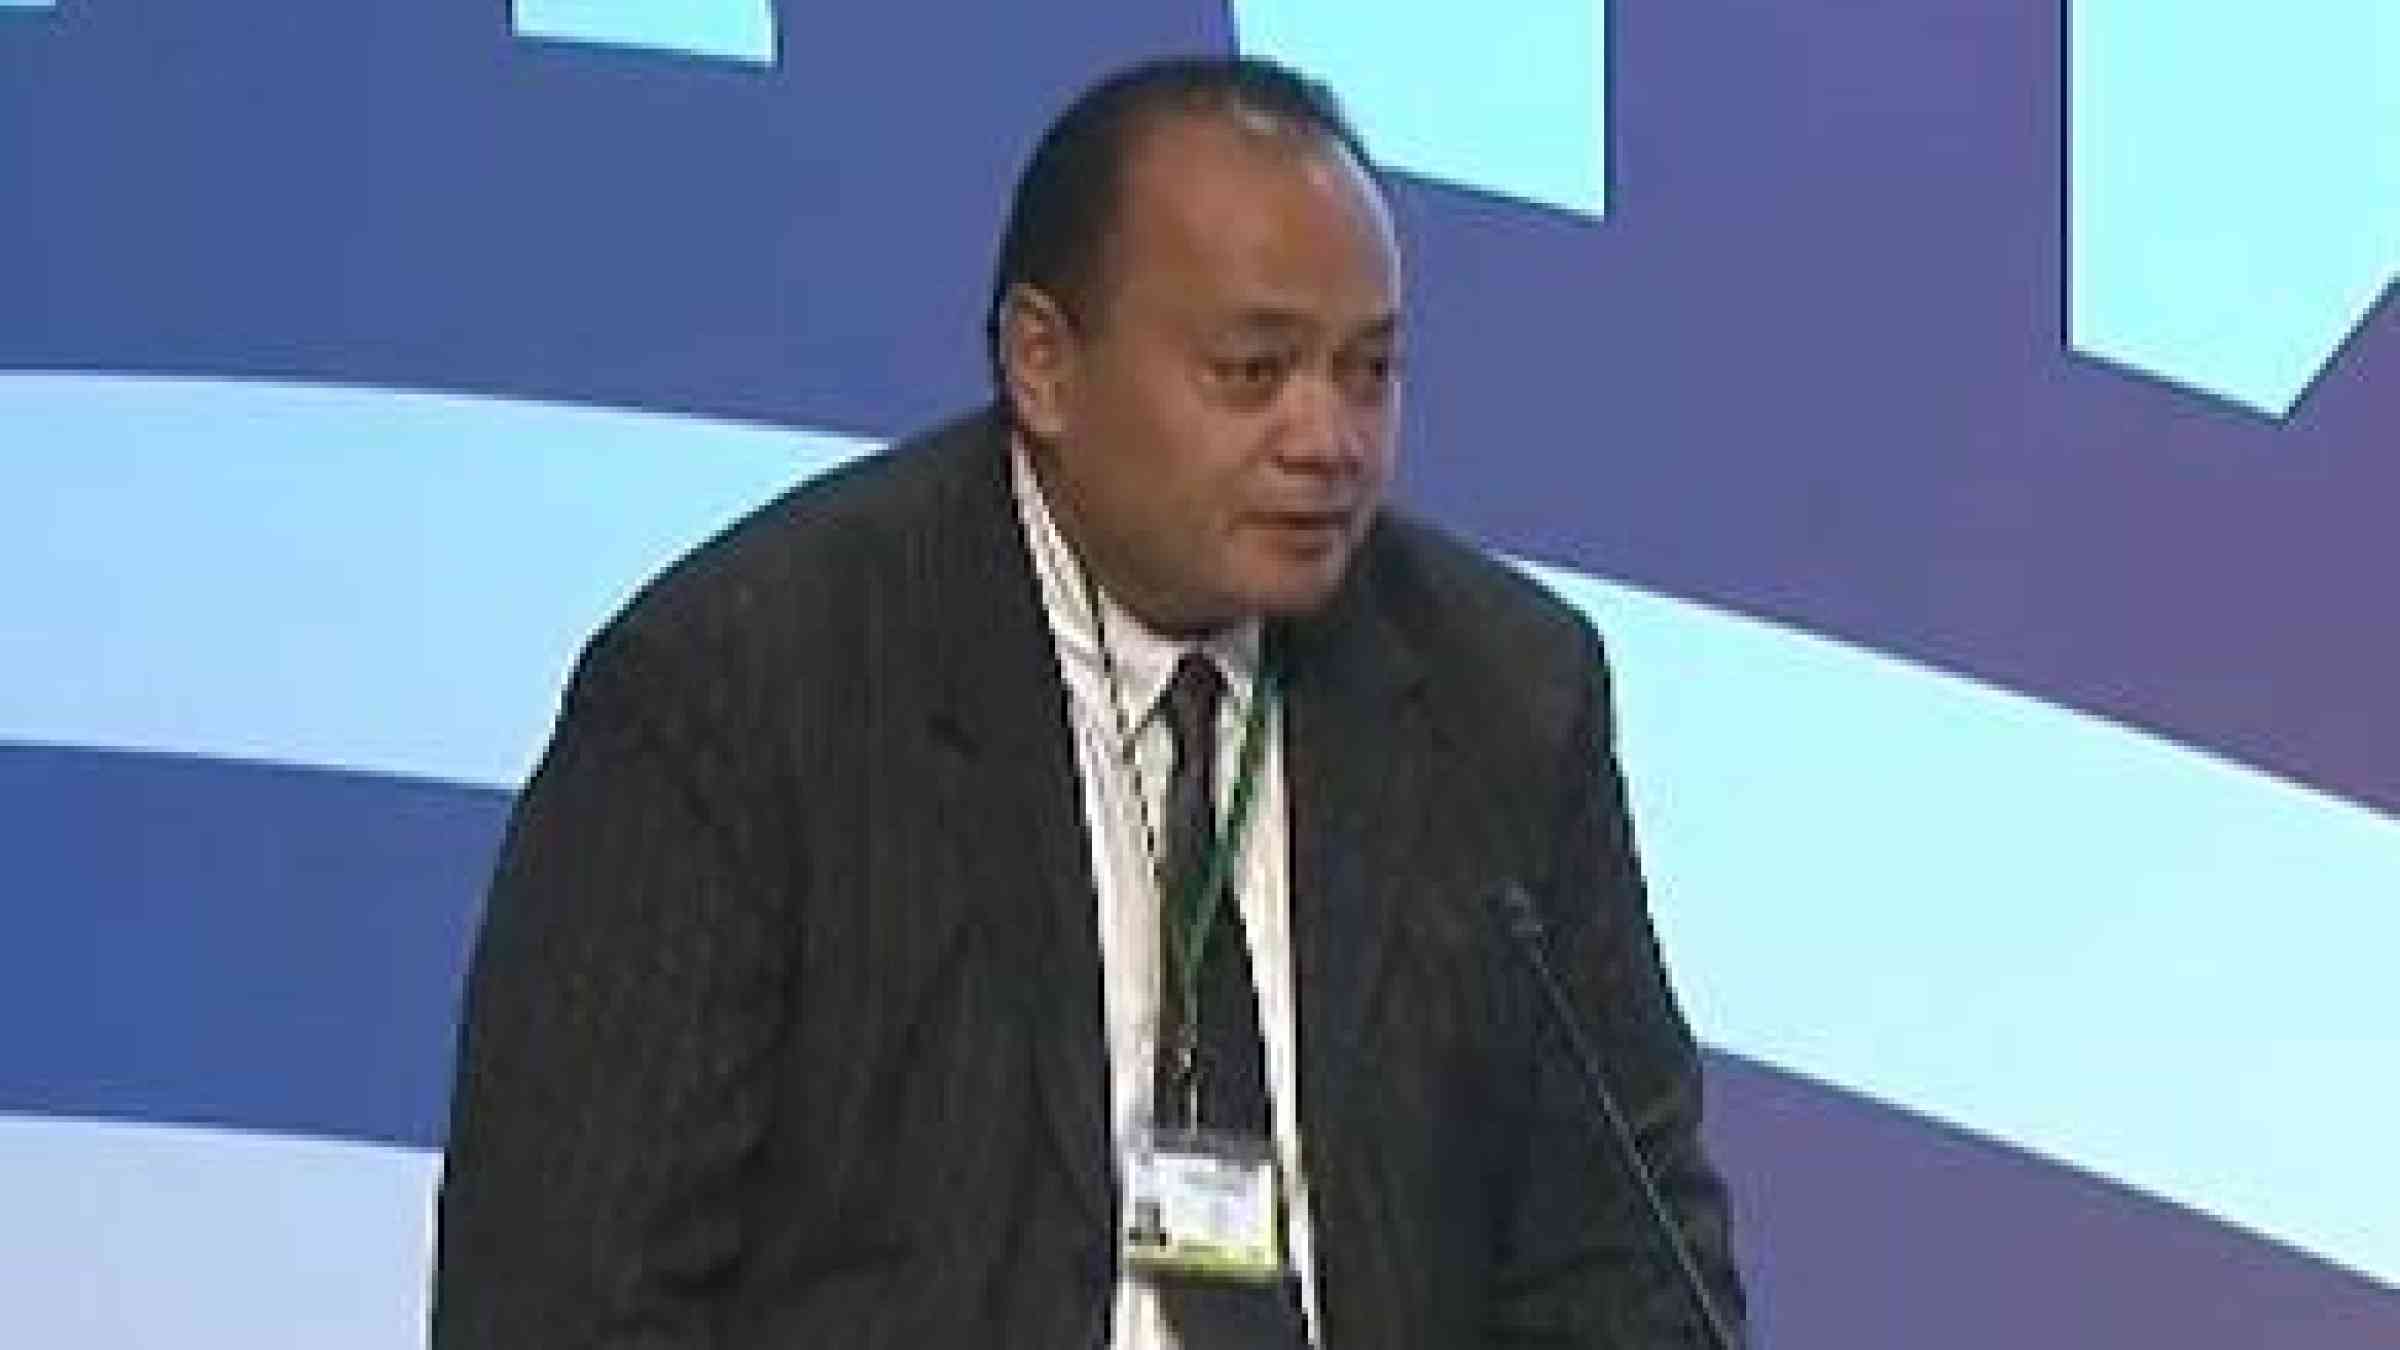 Photo by MIC/Government of Tonga Deputy Prime Minister, Hon. Siaosi Sovaleni addressing the 3WCDRR in Sendai, Japan